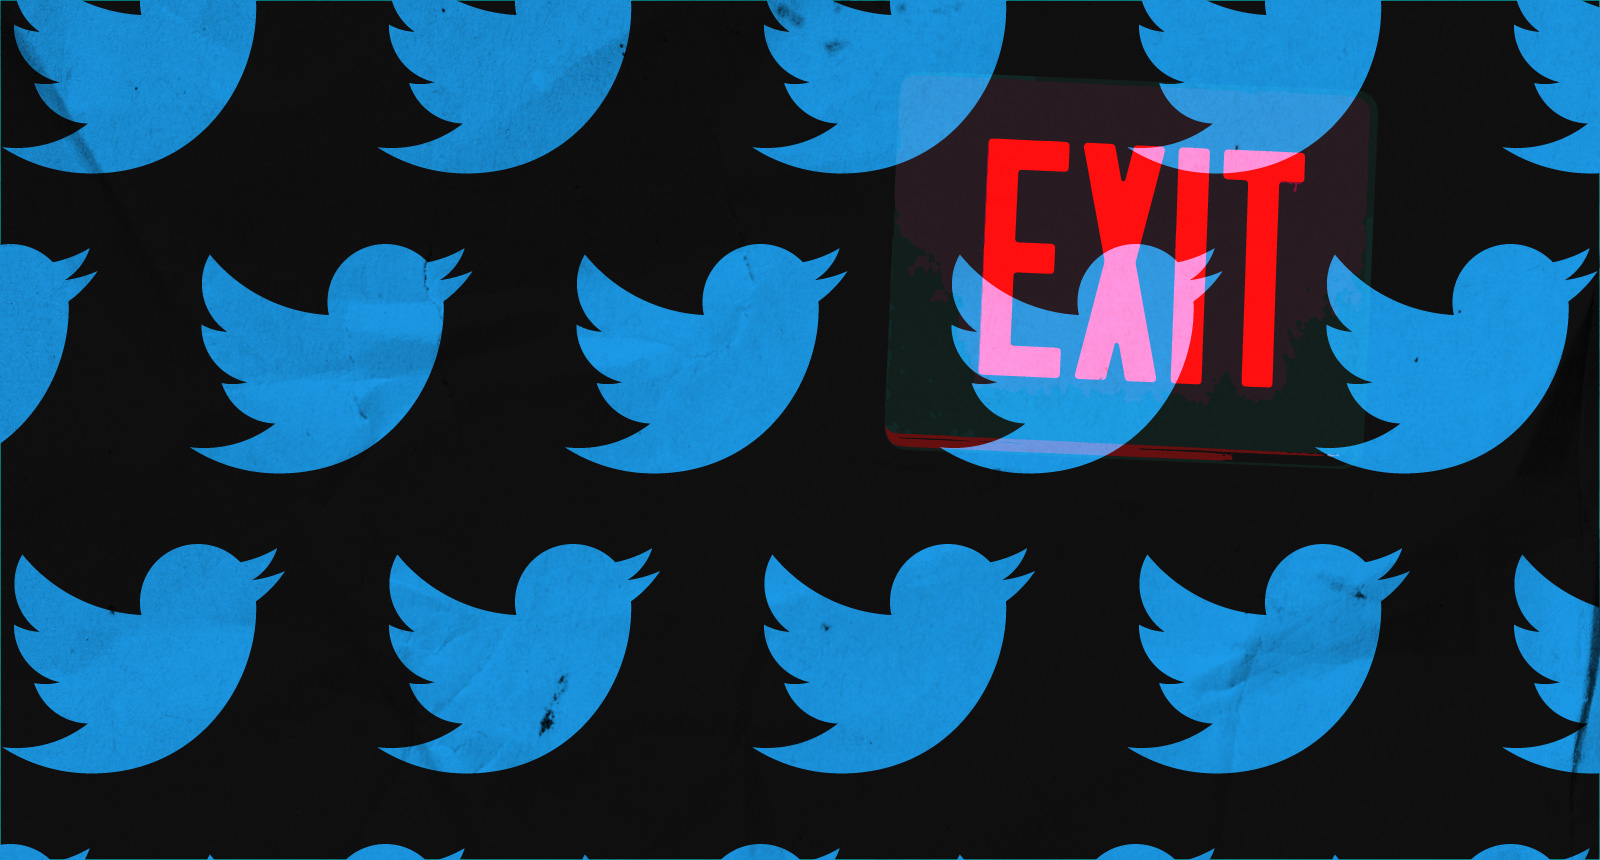 twitter bird logo pattern overlaid with exit sign